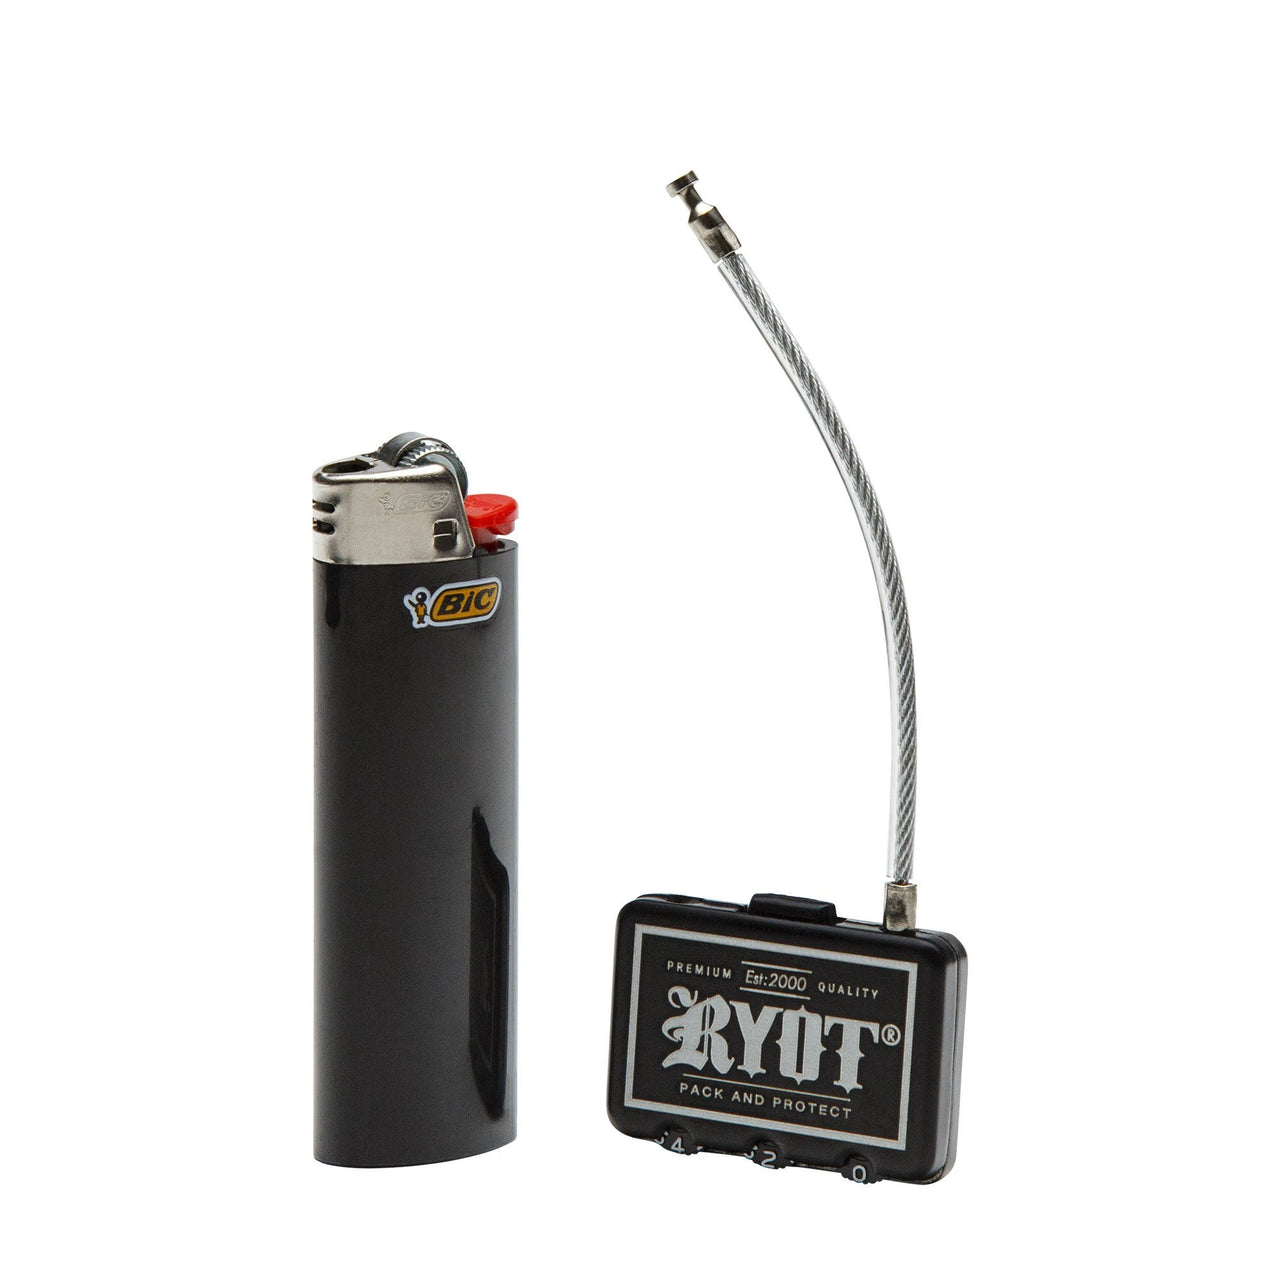 RYOT Combination Lock - 420 Science - The most trusted online smoke shop.